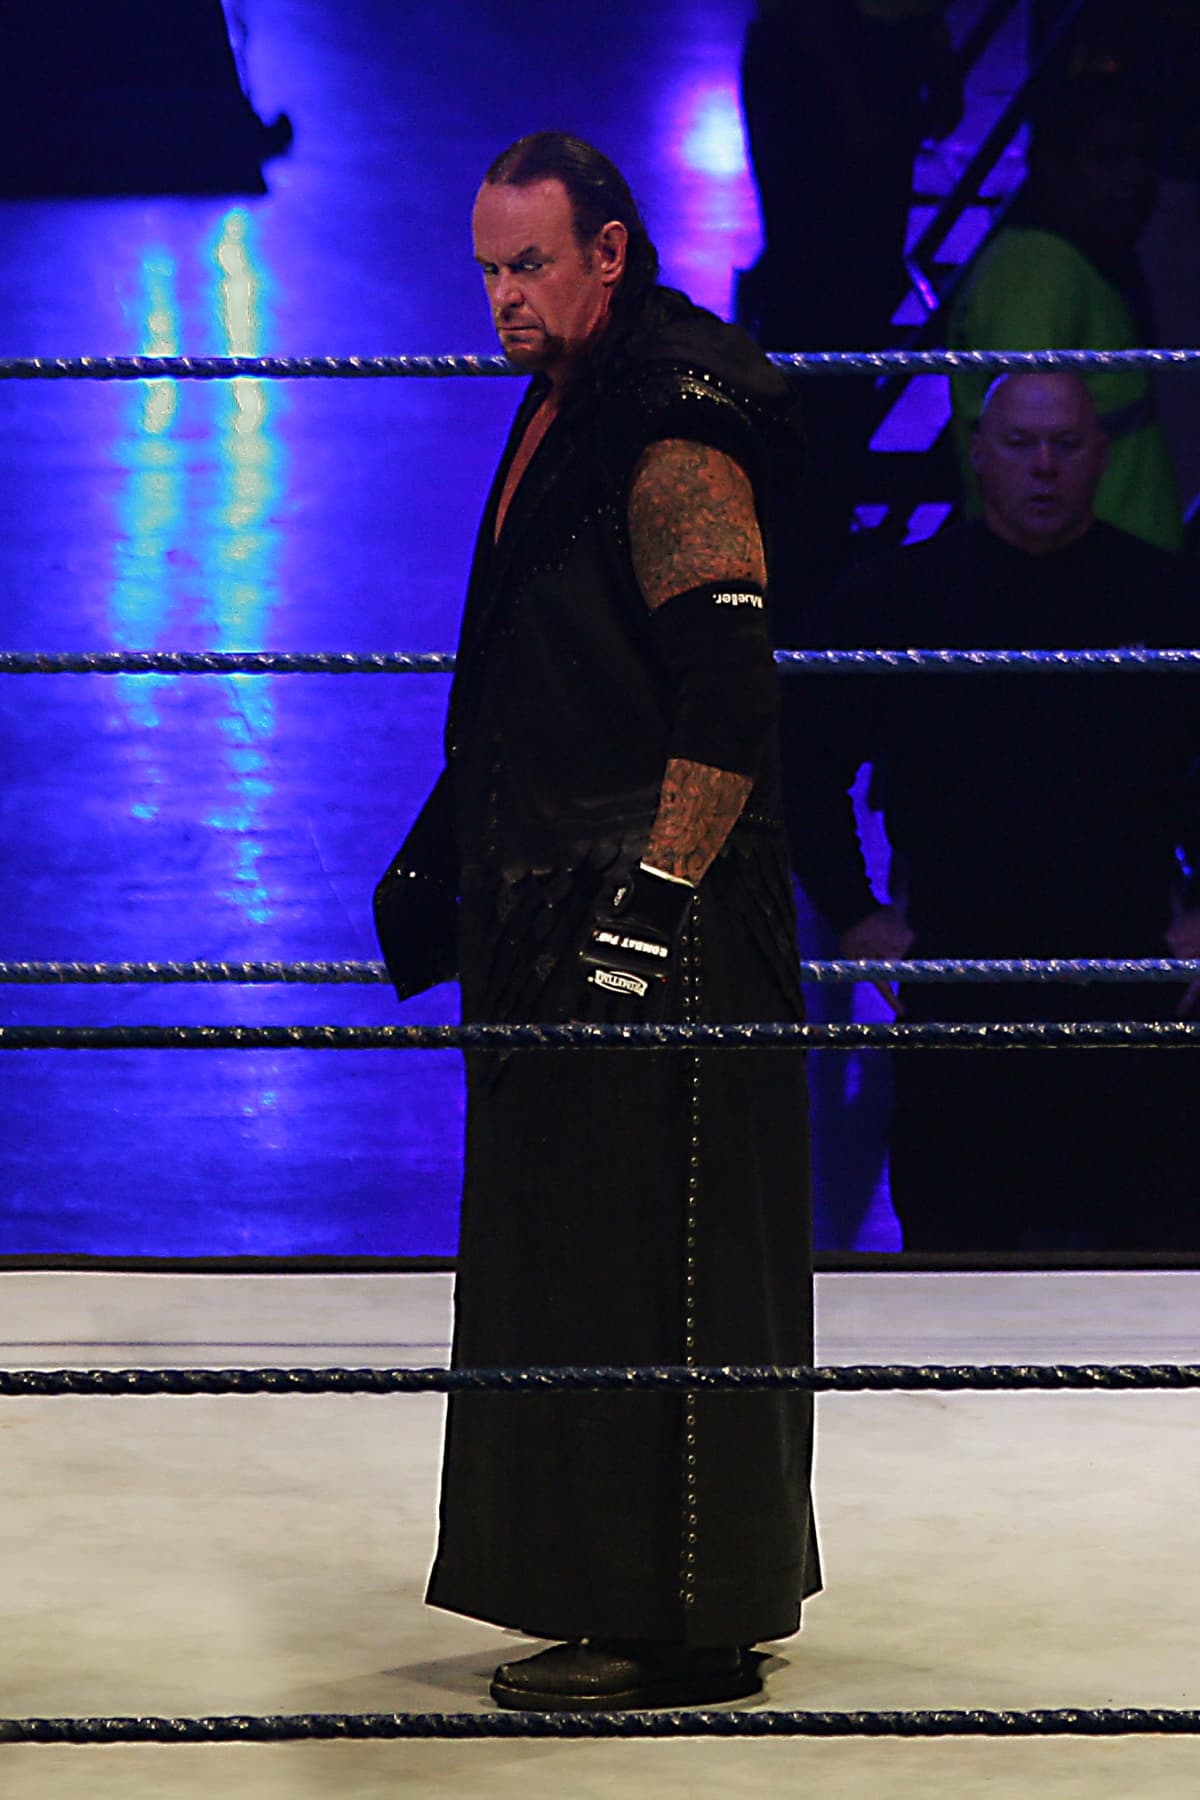 MONTERREY, MEXICO - MAY 09: Wrestling fighter Undertaker during the WWE Smackdown Wrestling at Arenal Monterrey on May 9, 2010 in Monterrey, Mexico. (Photo by Alfredo Lopez/Jam Media/LatinContent via Getty Images)